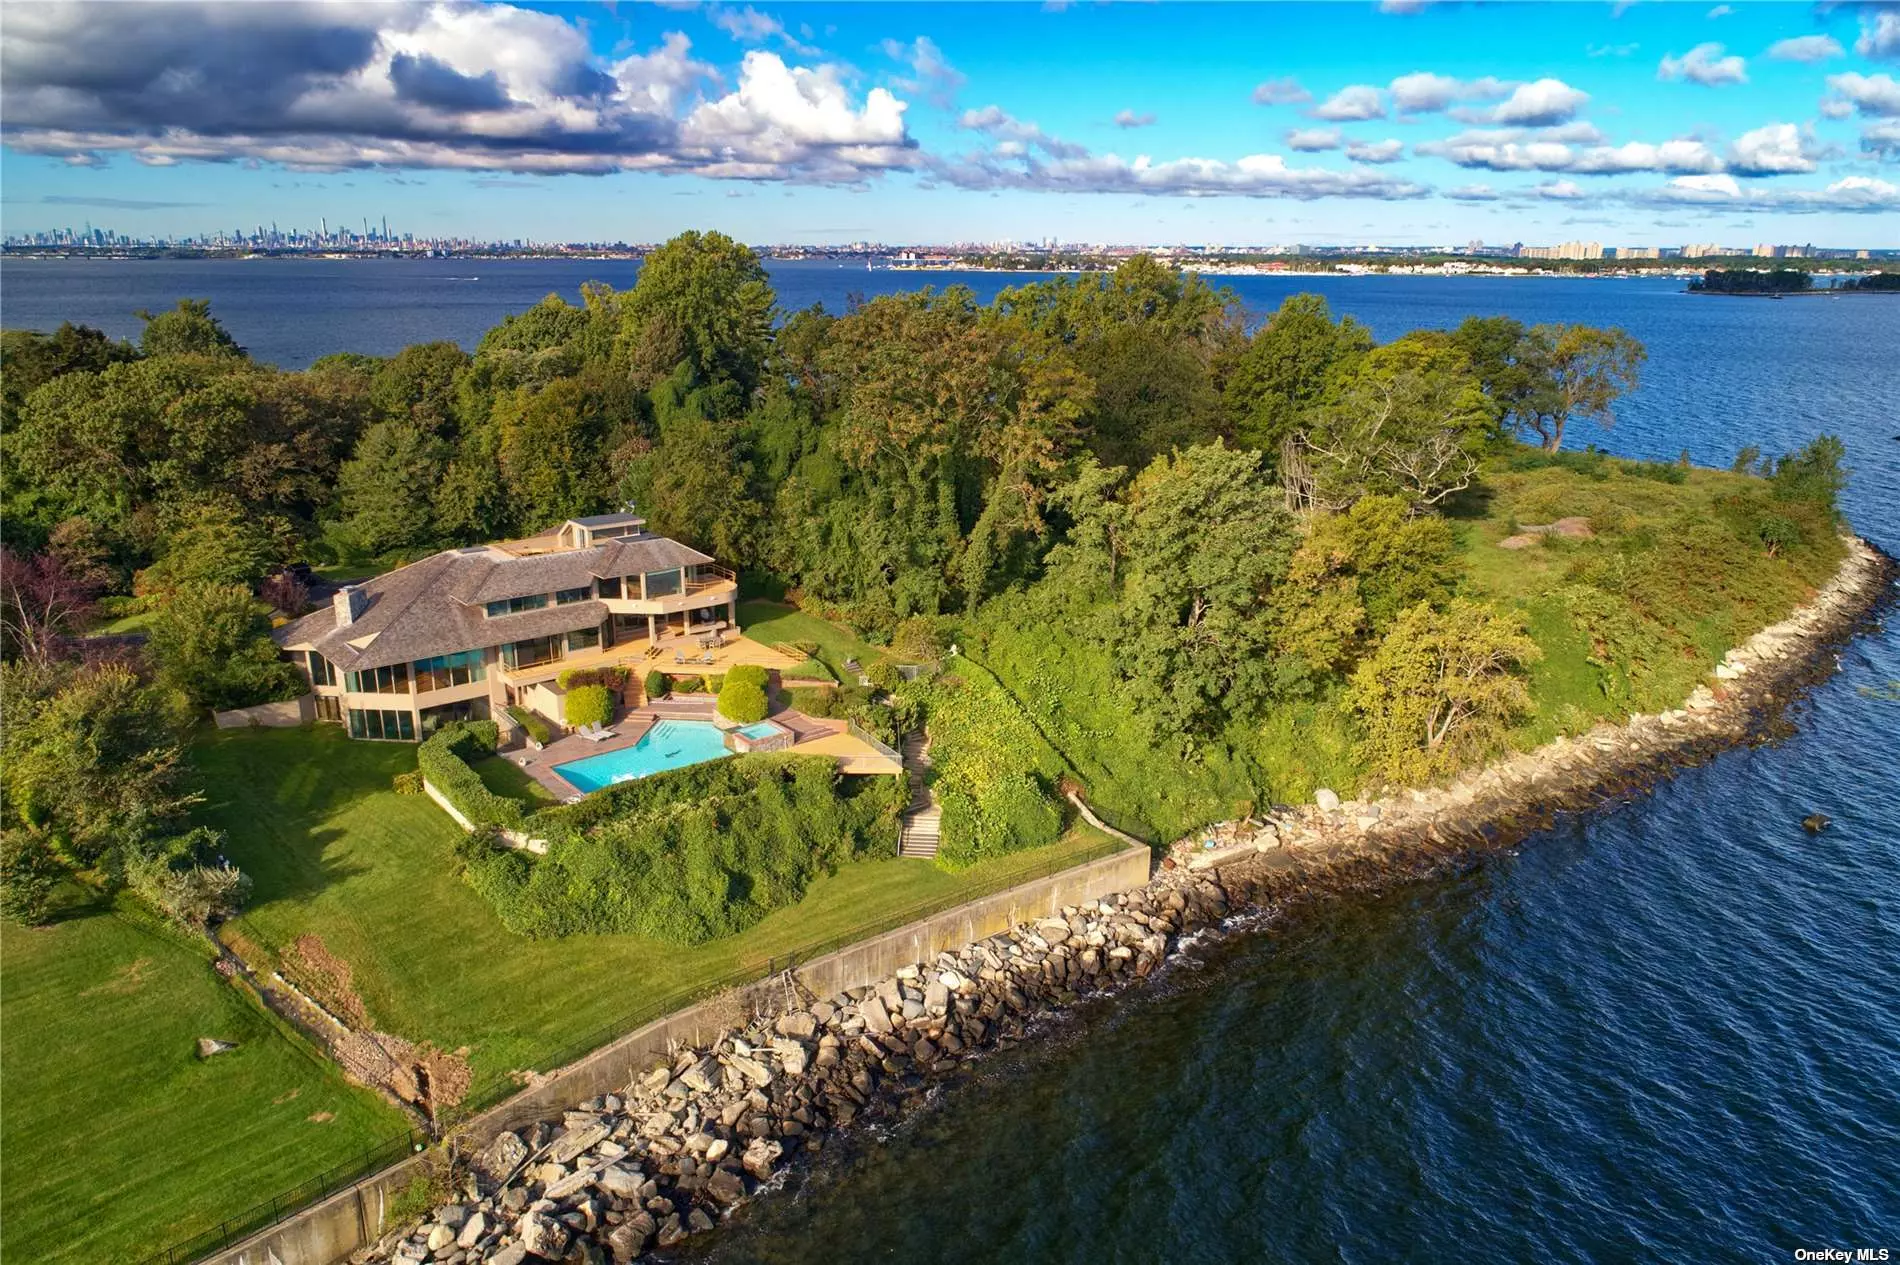 This Architectural Contemporary Masterpiece in the Prestigious Enclave of Kings Point is Set on Over 1 Acre of Serene Waterfront Property on One of the Most Famous and Sought After Addresses on the Gold Coast of Long Island, Gatsby Lane. Built for Entertainment, the Home Features Exquisite and Expansive Waterfront Views With Floor to Ceiling Windows, Multiple Balconies, In Ground Heated Pool, Game Room, Gym and Many Gathering Areas Throughout the Home and Property. The Primary Bedroom Has Separate Sleeping and Dressing/Sitting Area With Two Full Baths As Well As a Private Balcony and Access to a Private Roof Top Deck Under the Stars. Relax , or Entertain By Poolside While Capturing the Spectacular and Expansive Breathtaking Water Views of the Long Island Sound.